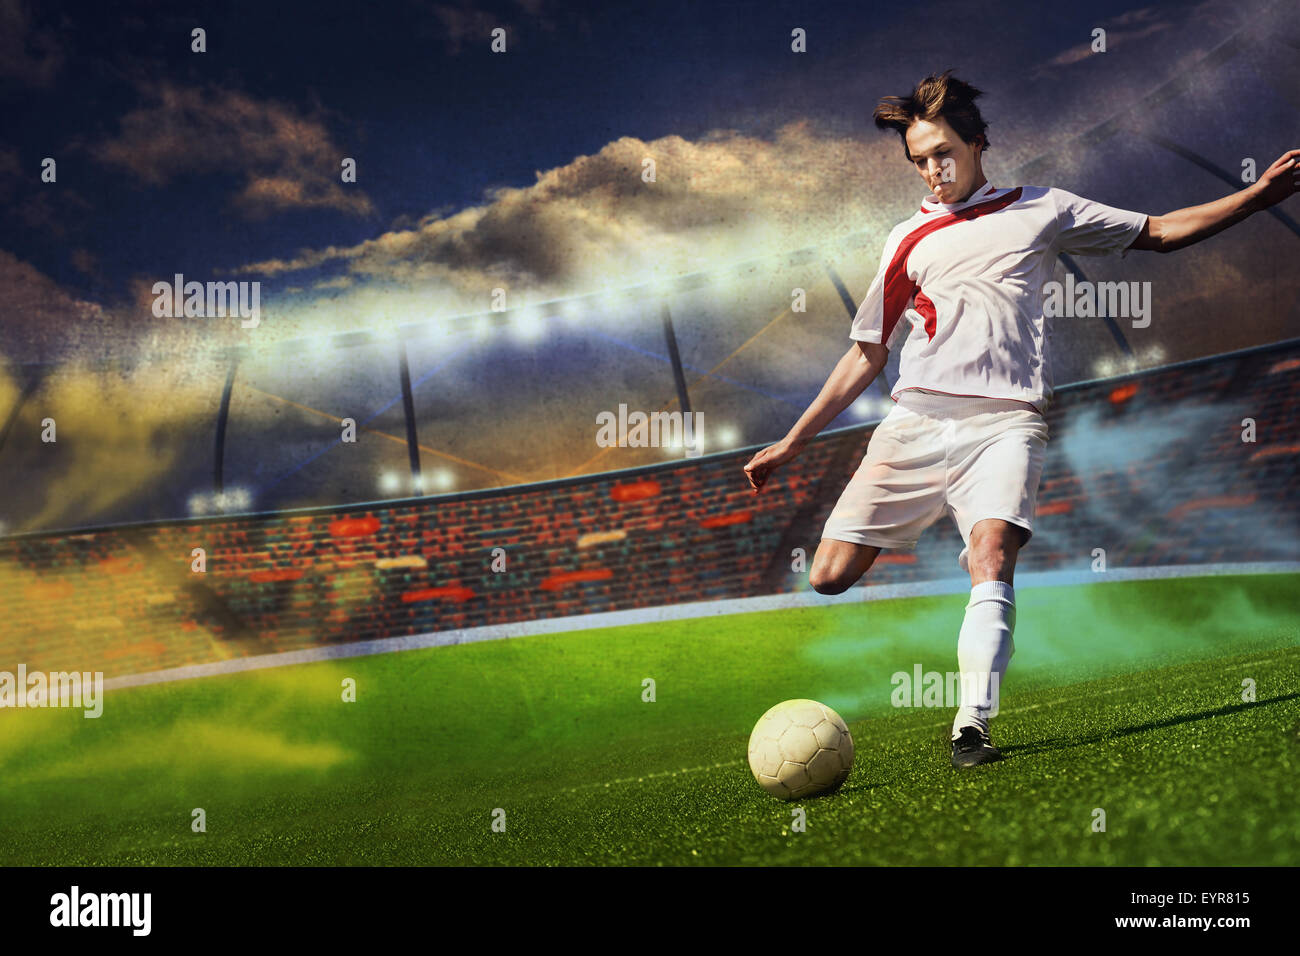 soccer or football player on the field Stock Photo